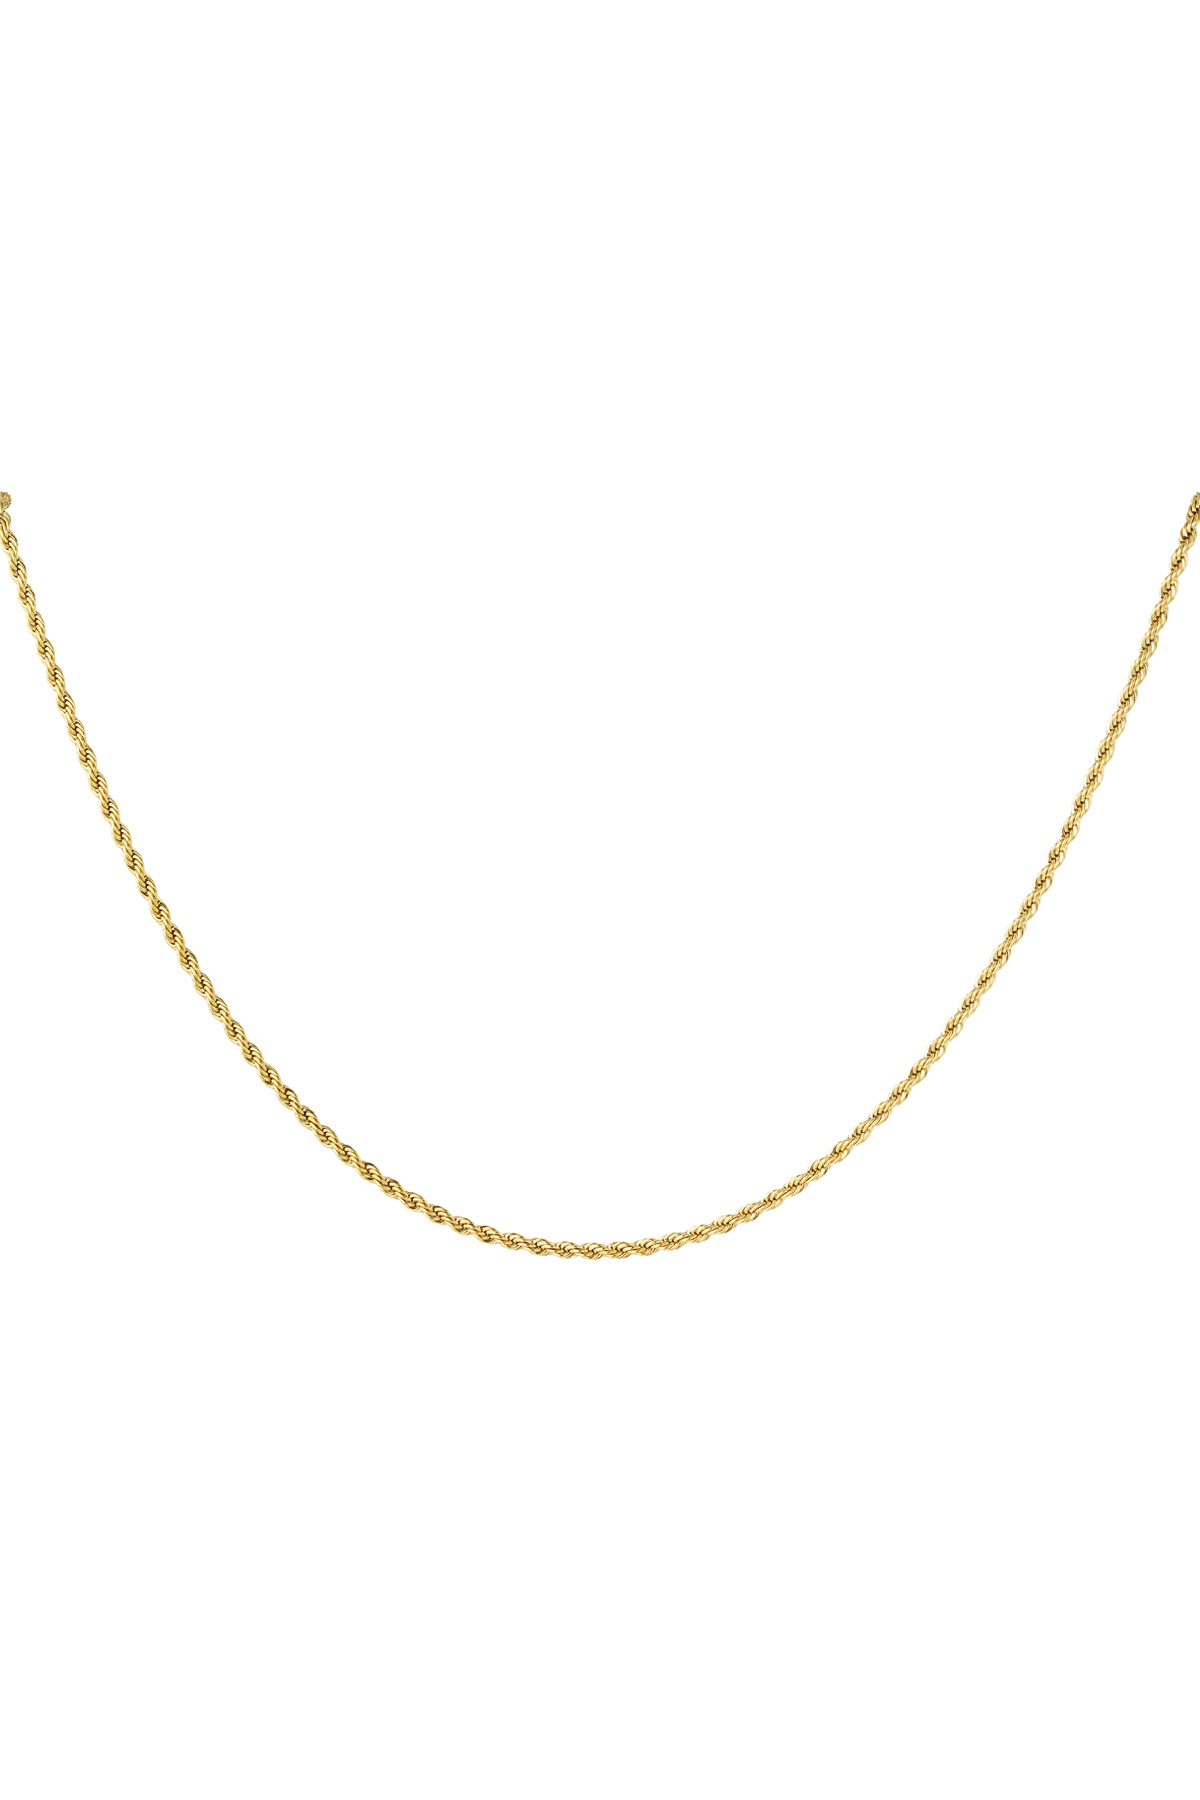 Unisex necklace twisted short - gold-2.0MM 